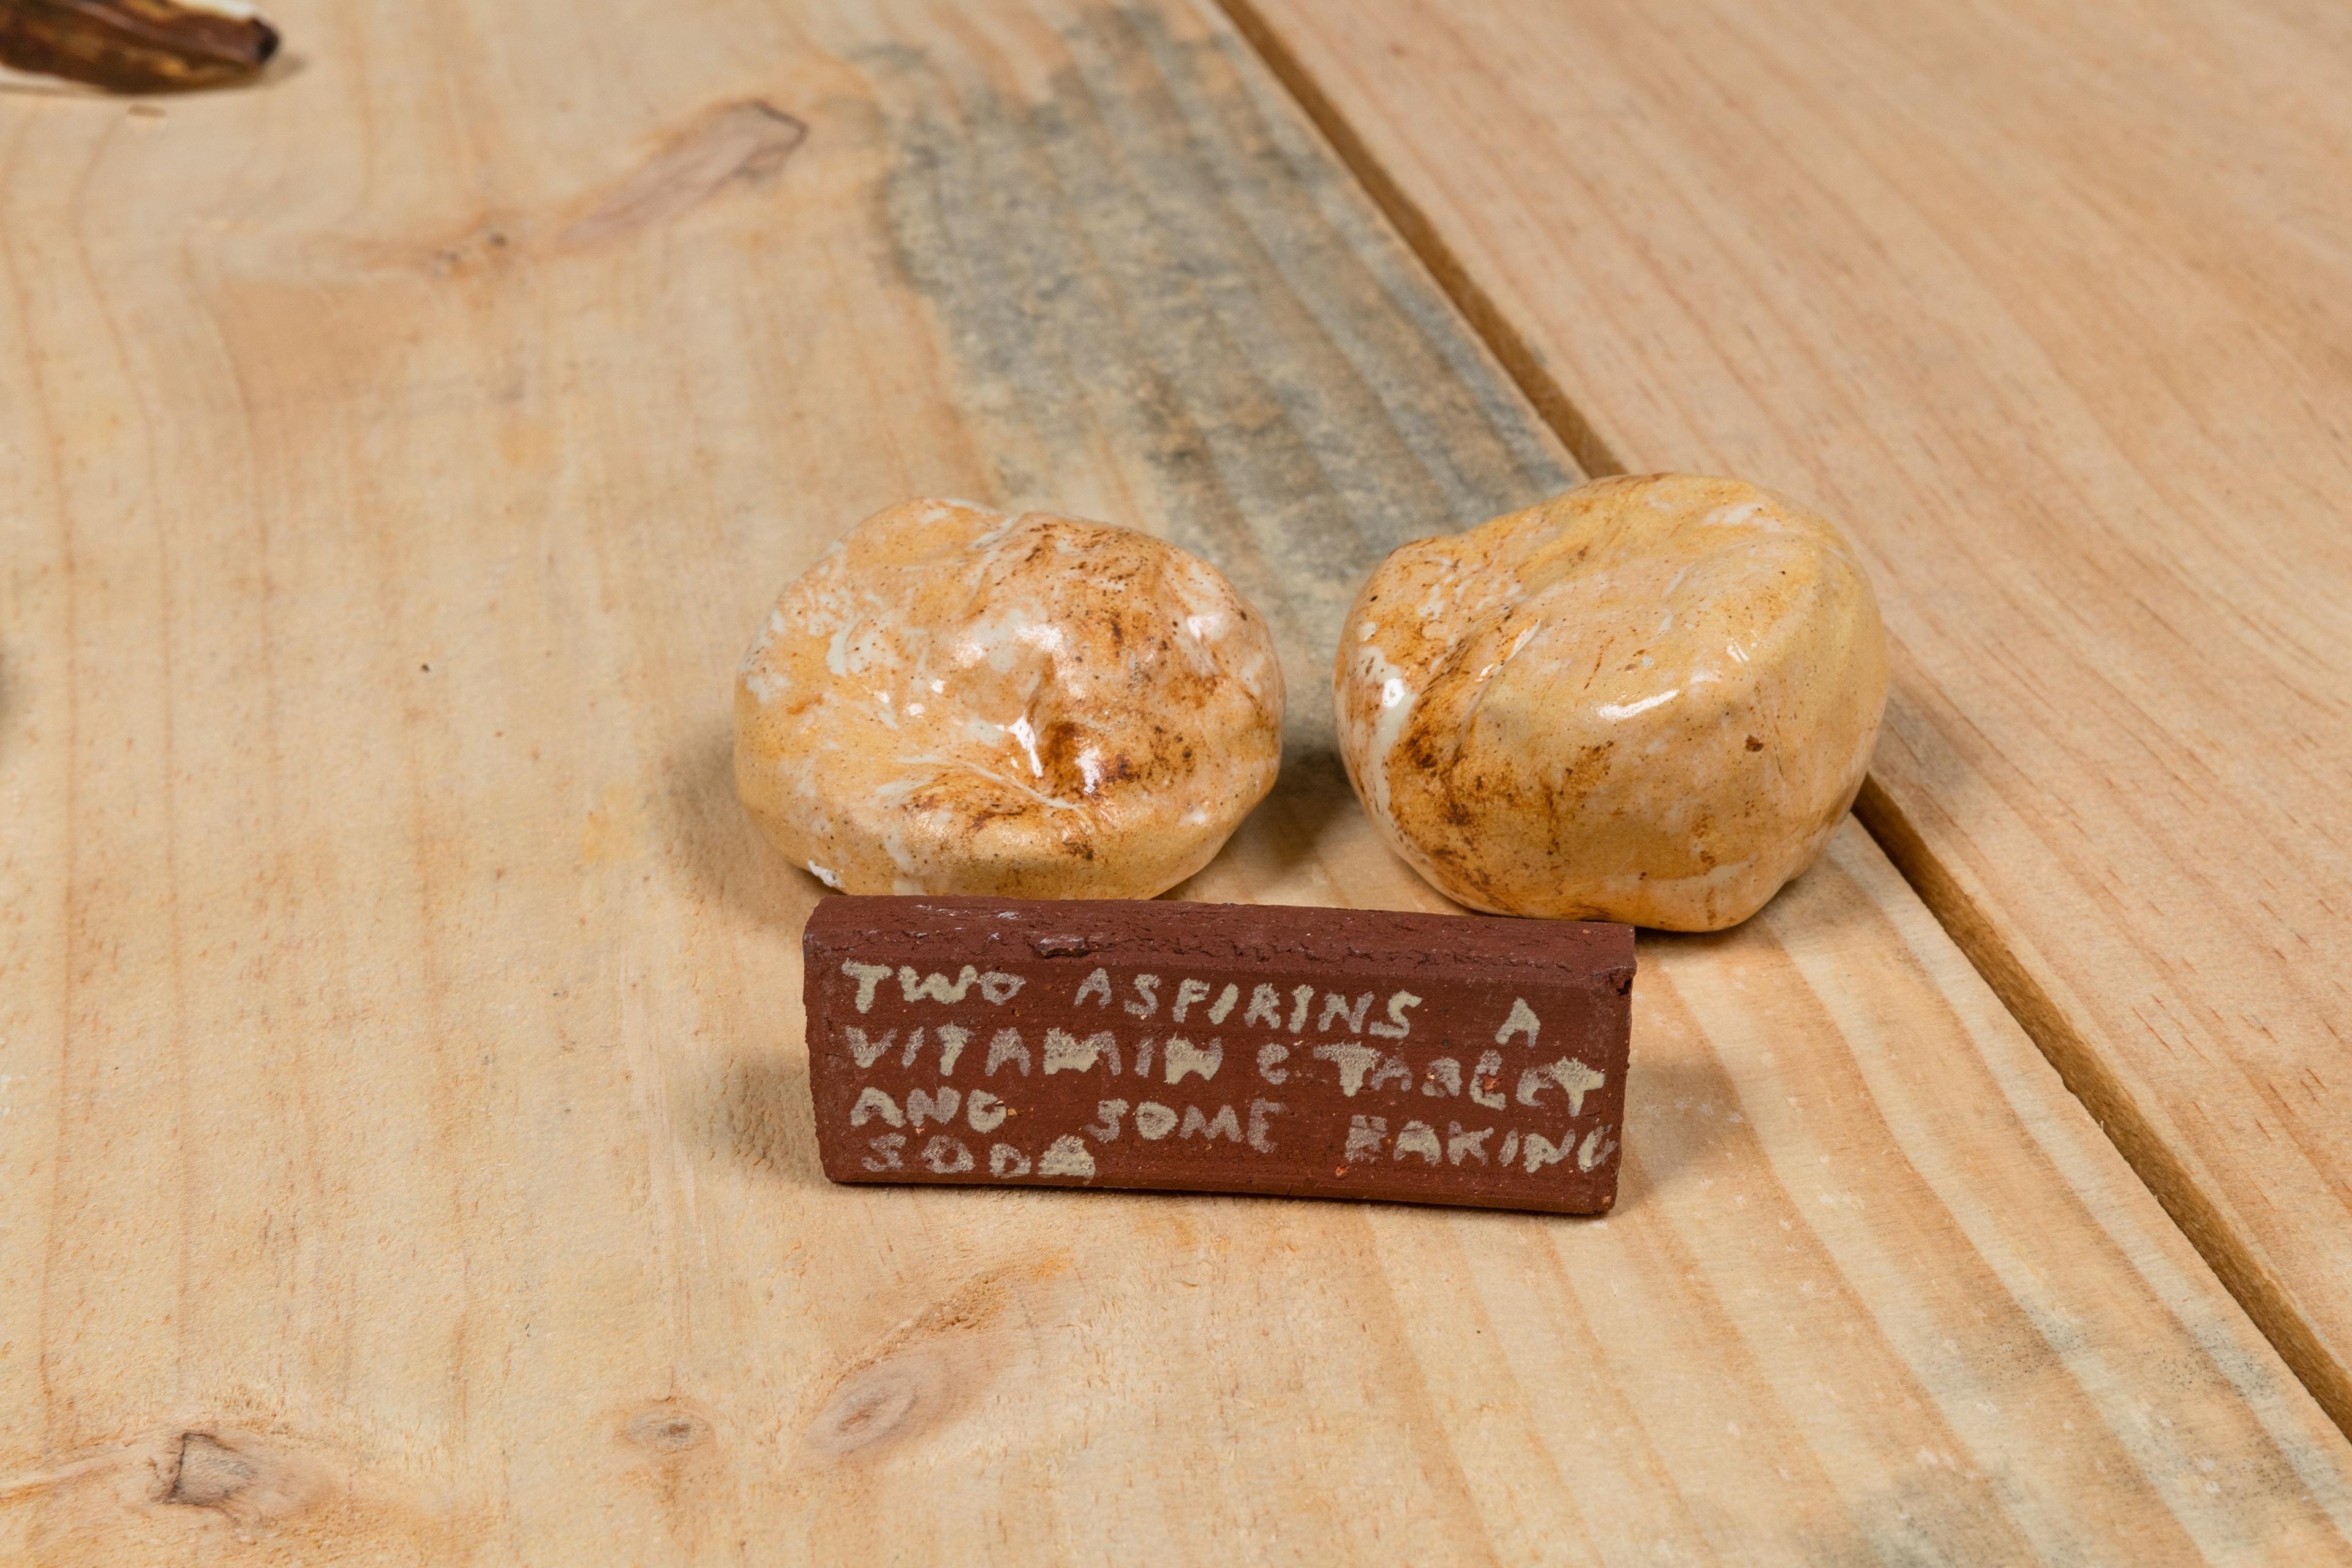 Two small ceramic items, with a additional ceramic sign stating 'two aspirins a vitamin c tablet and some baking soda', placed on wooden bench.